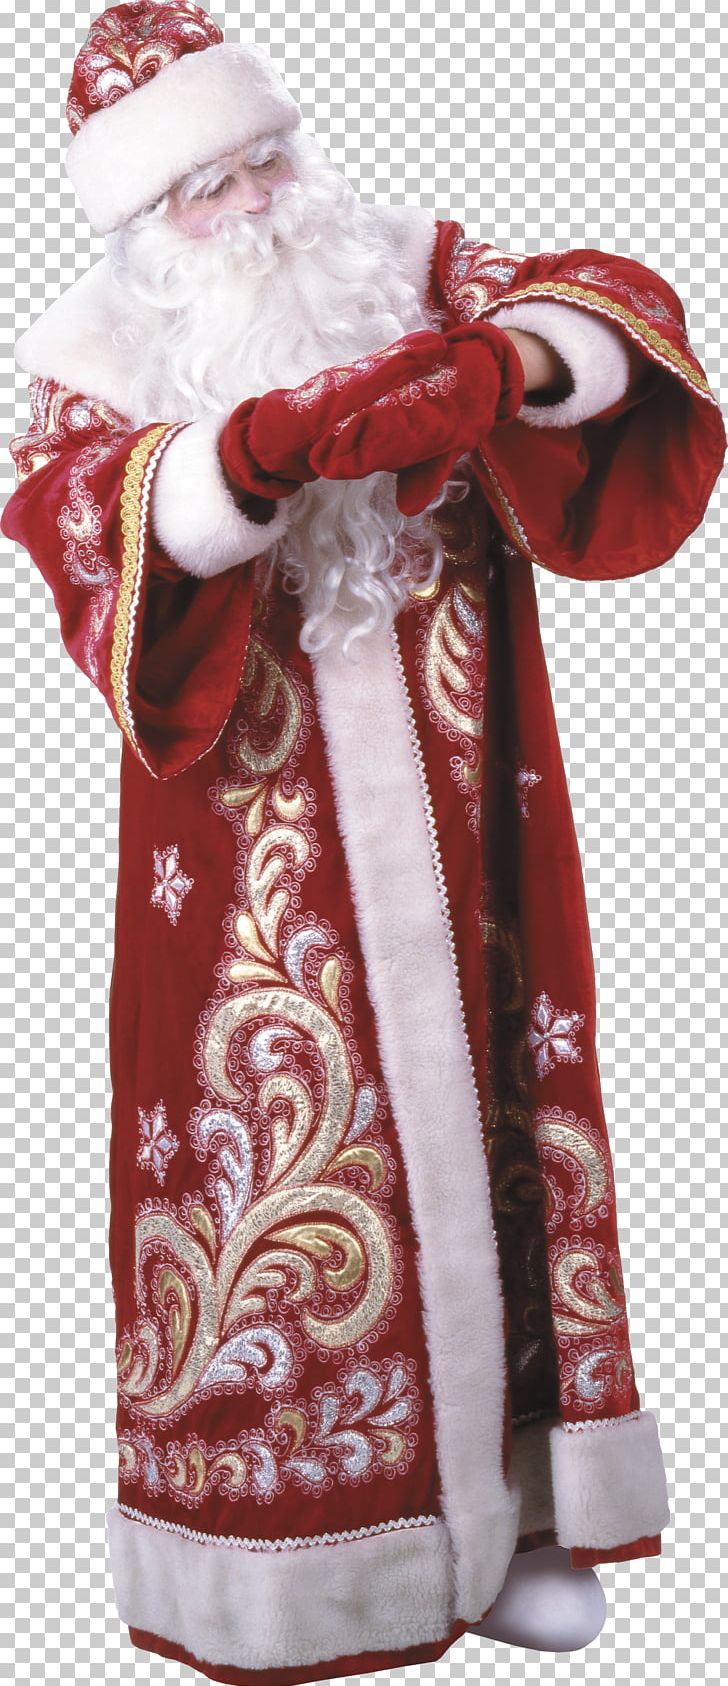 Santa Claus Snegurochka Ded Moroz Christmas Ornament Christmas Decoration PNG, Clipart, Character, Christmas, Christmas Decoration, Christmas Ornament, Ded Moroz Free PNG Download